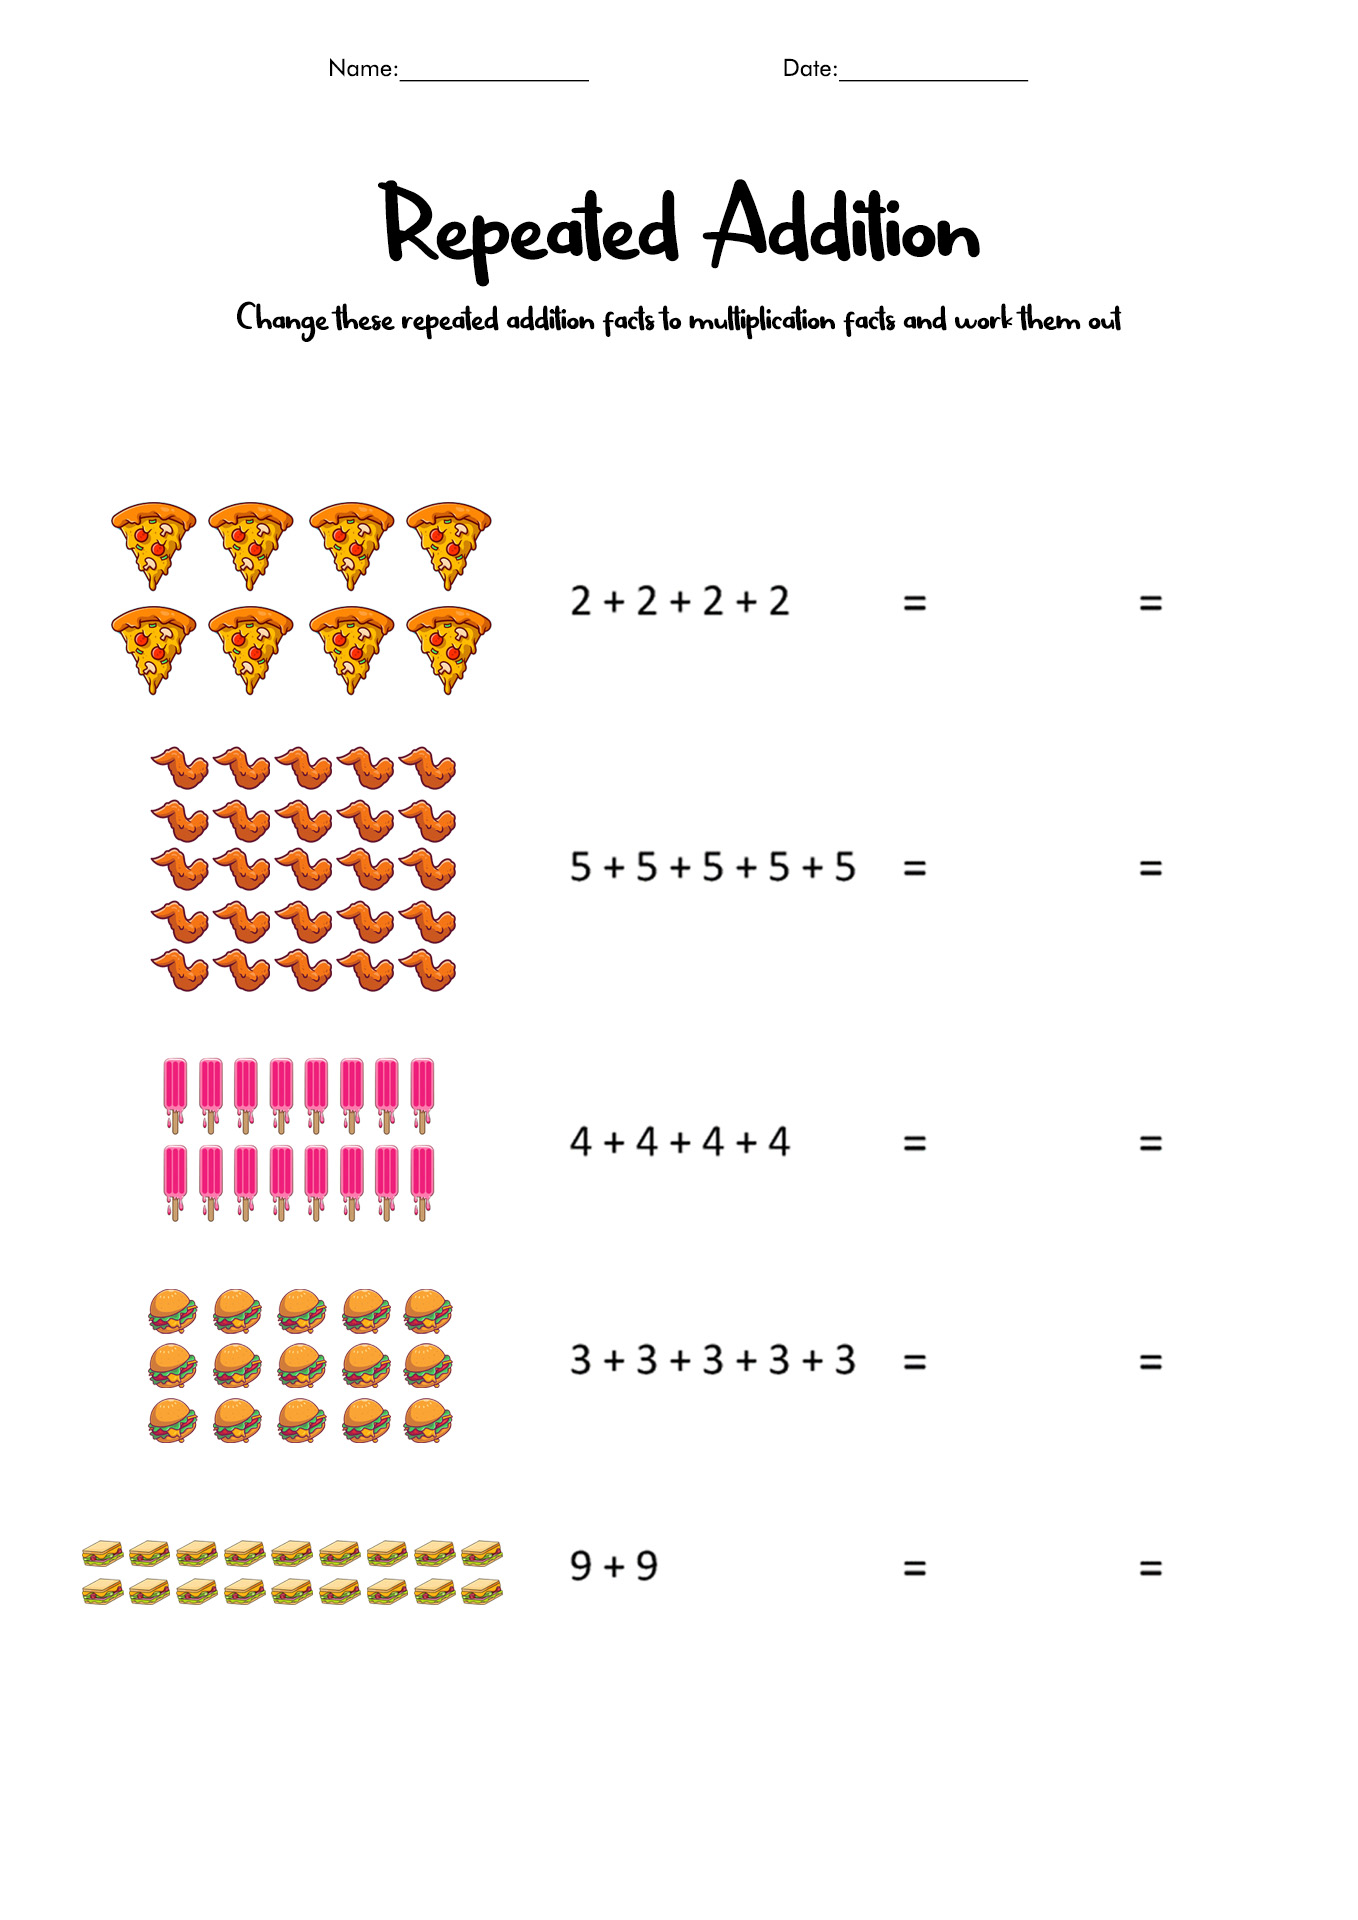 16-best-images-of-addition-arrays-worksheets-multiplication-repeated-addition-arrays